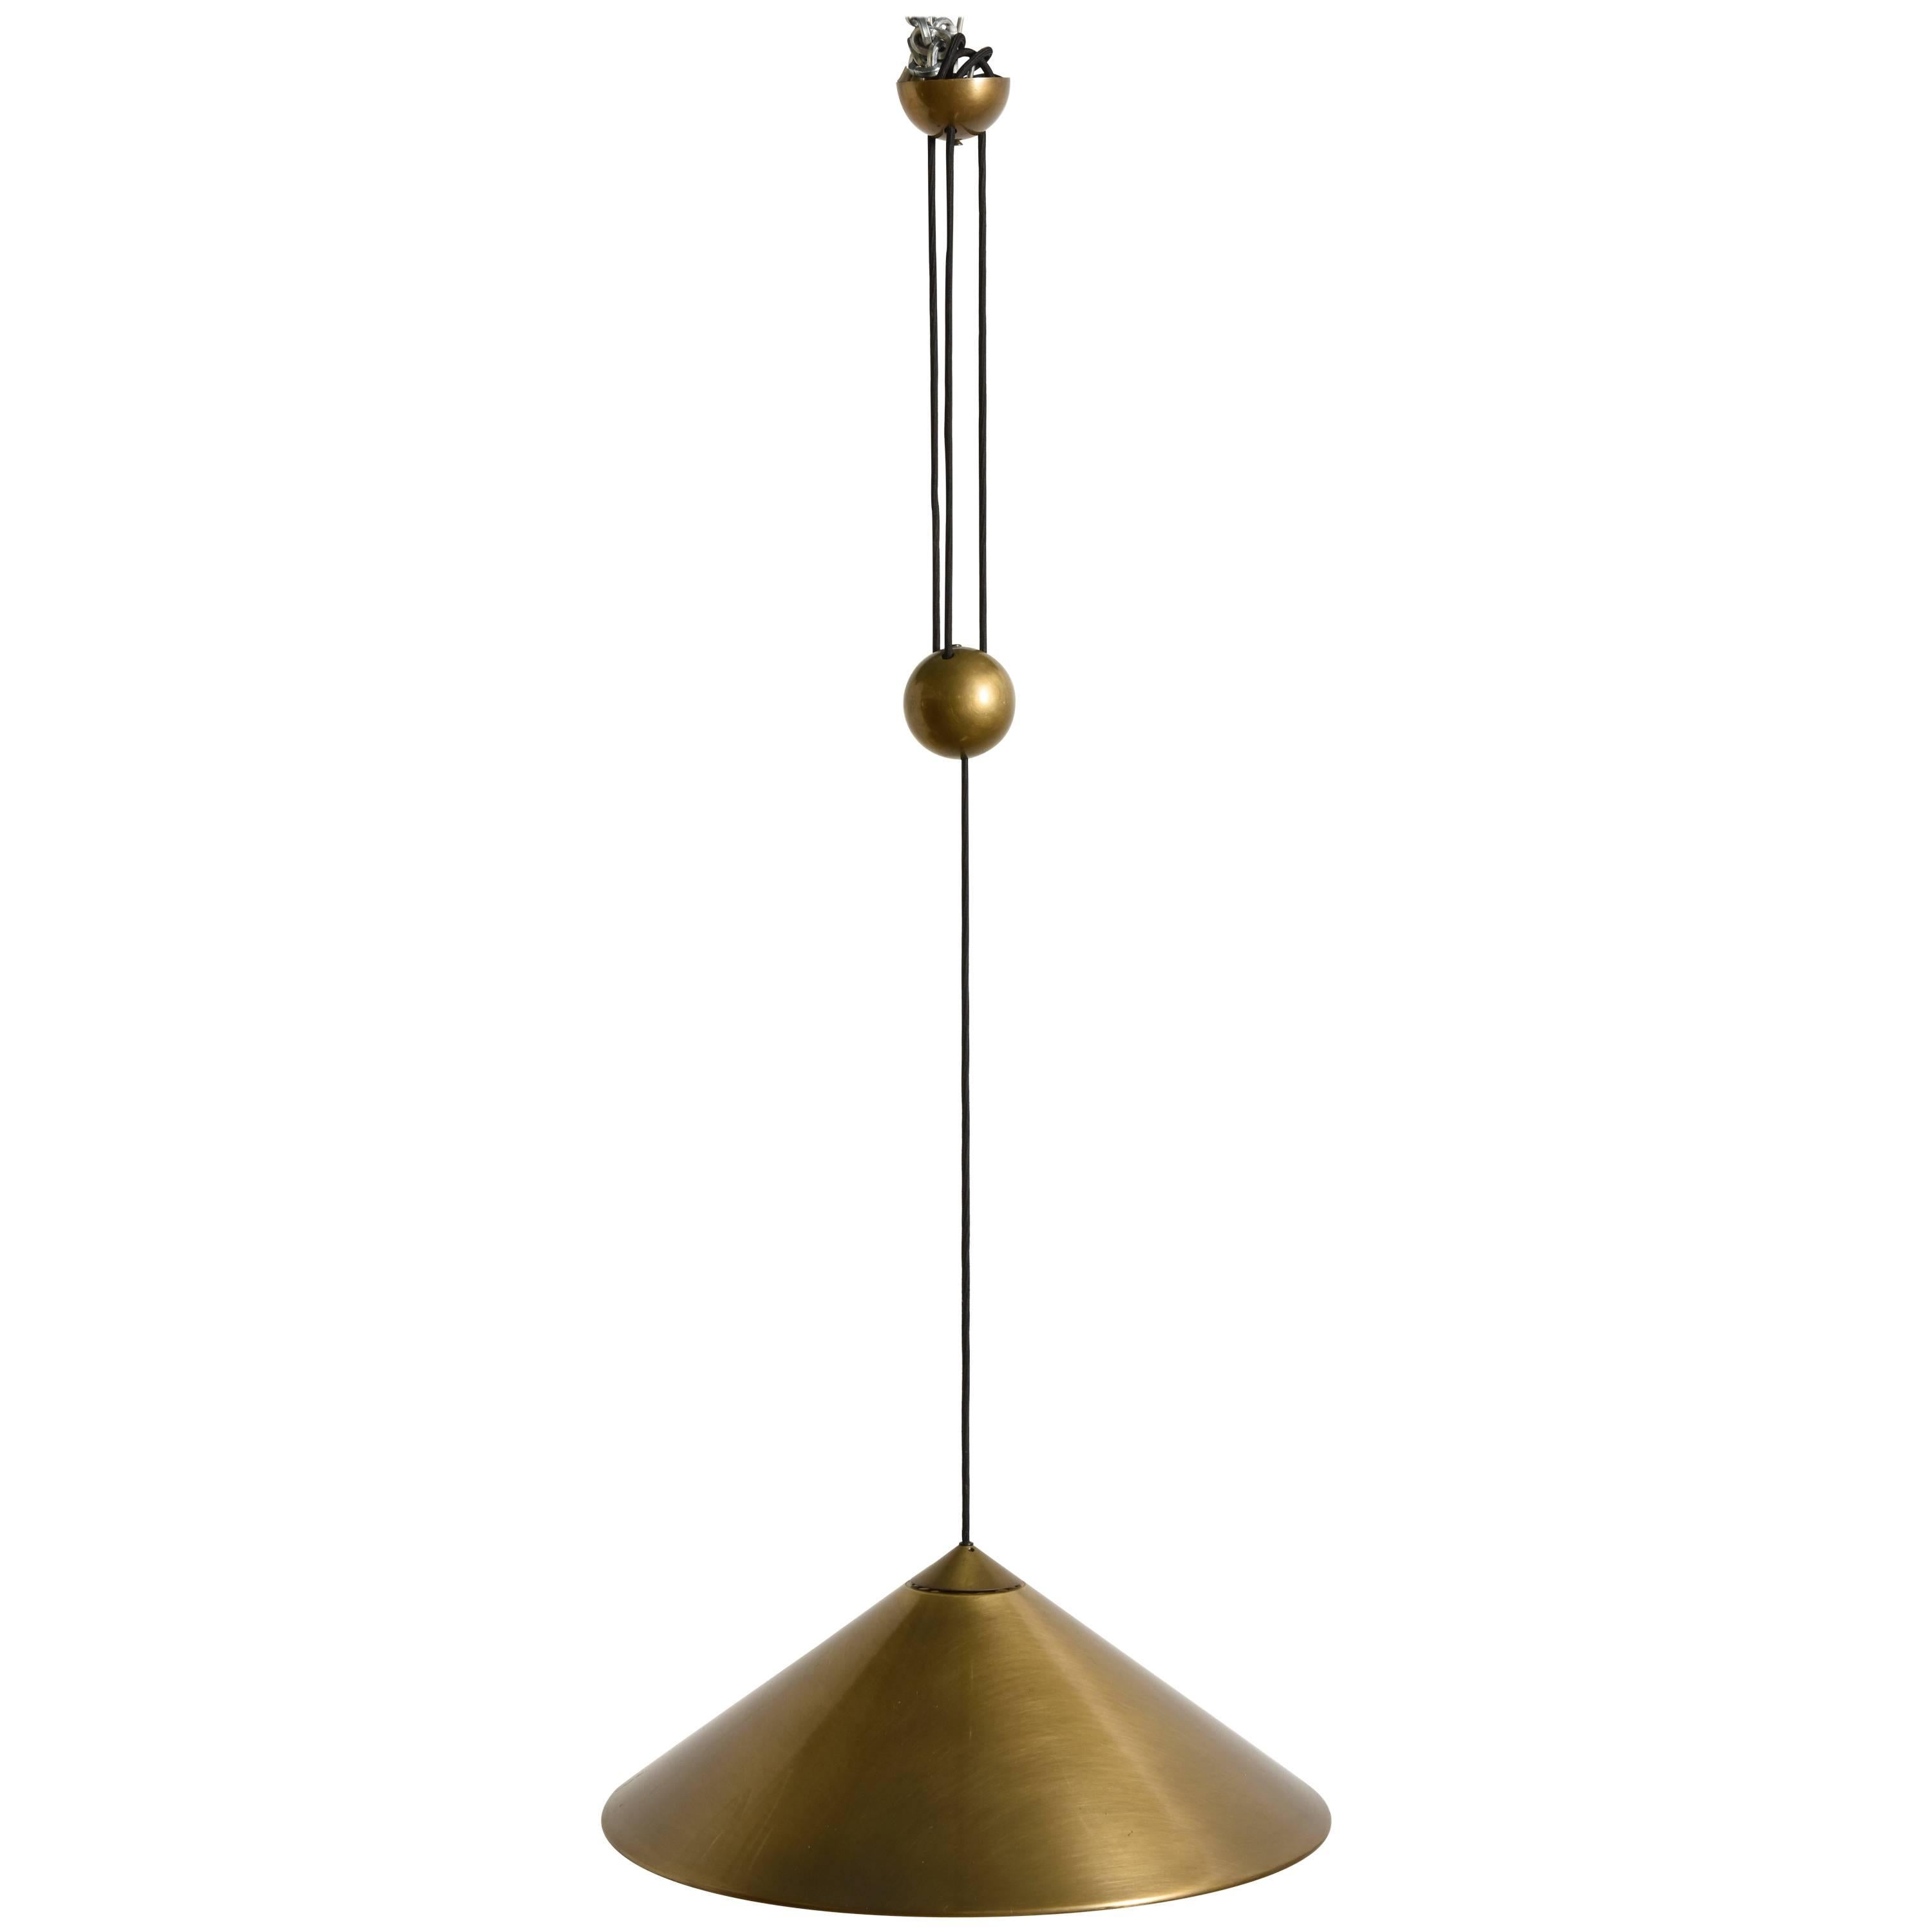 Keos Counter Balance Brass Pendant by Florian Schulz, Germany